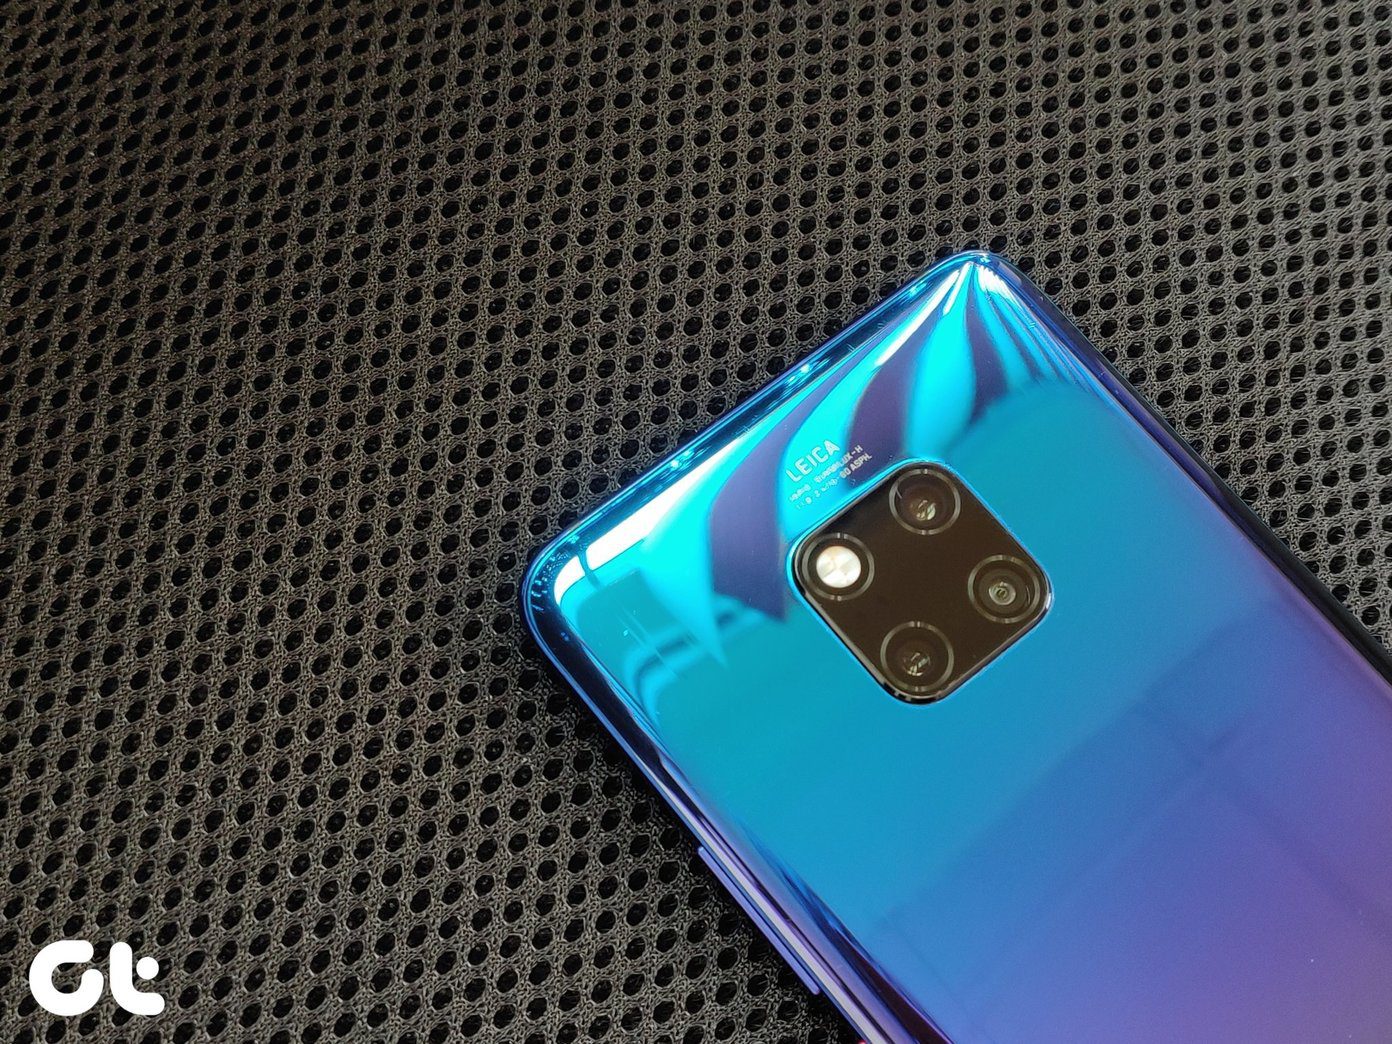 9 Best Huawei Mate 20 Pro Camera Tips and Tricks